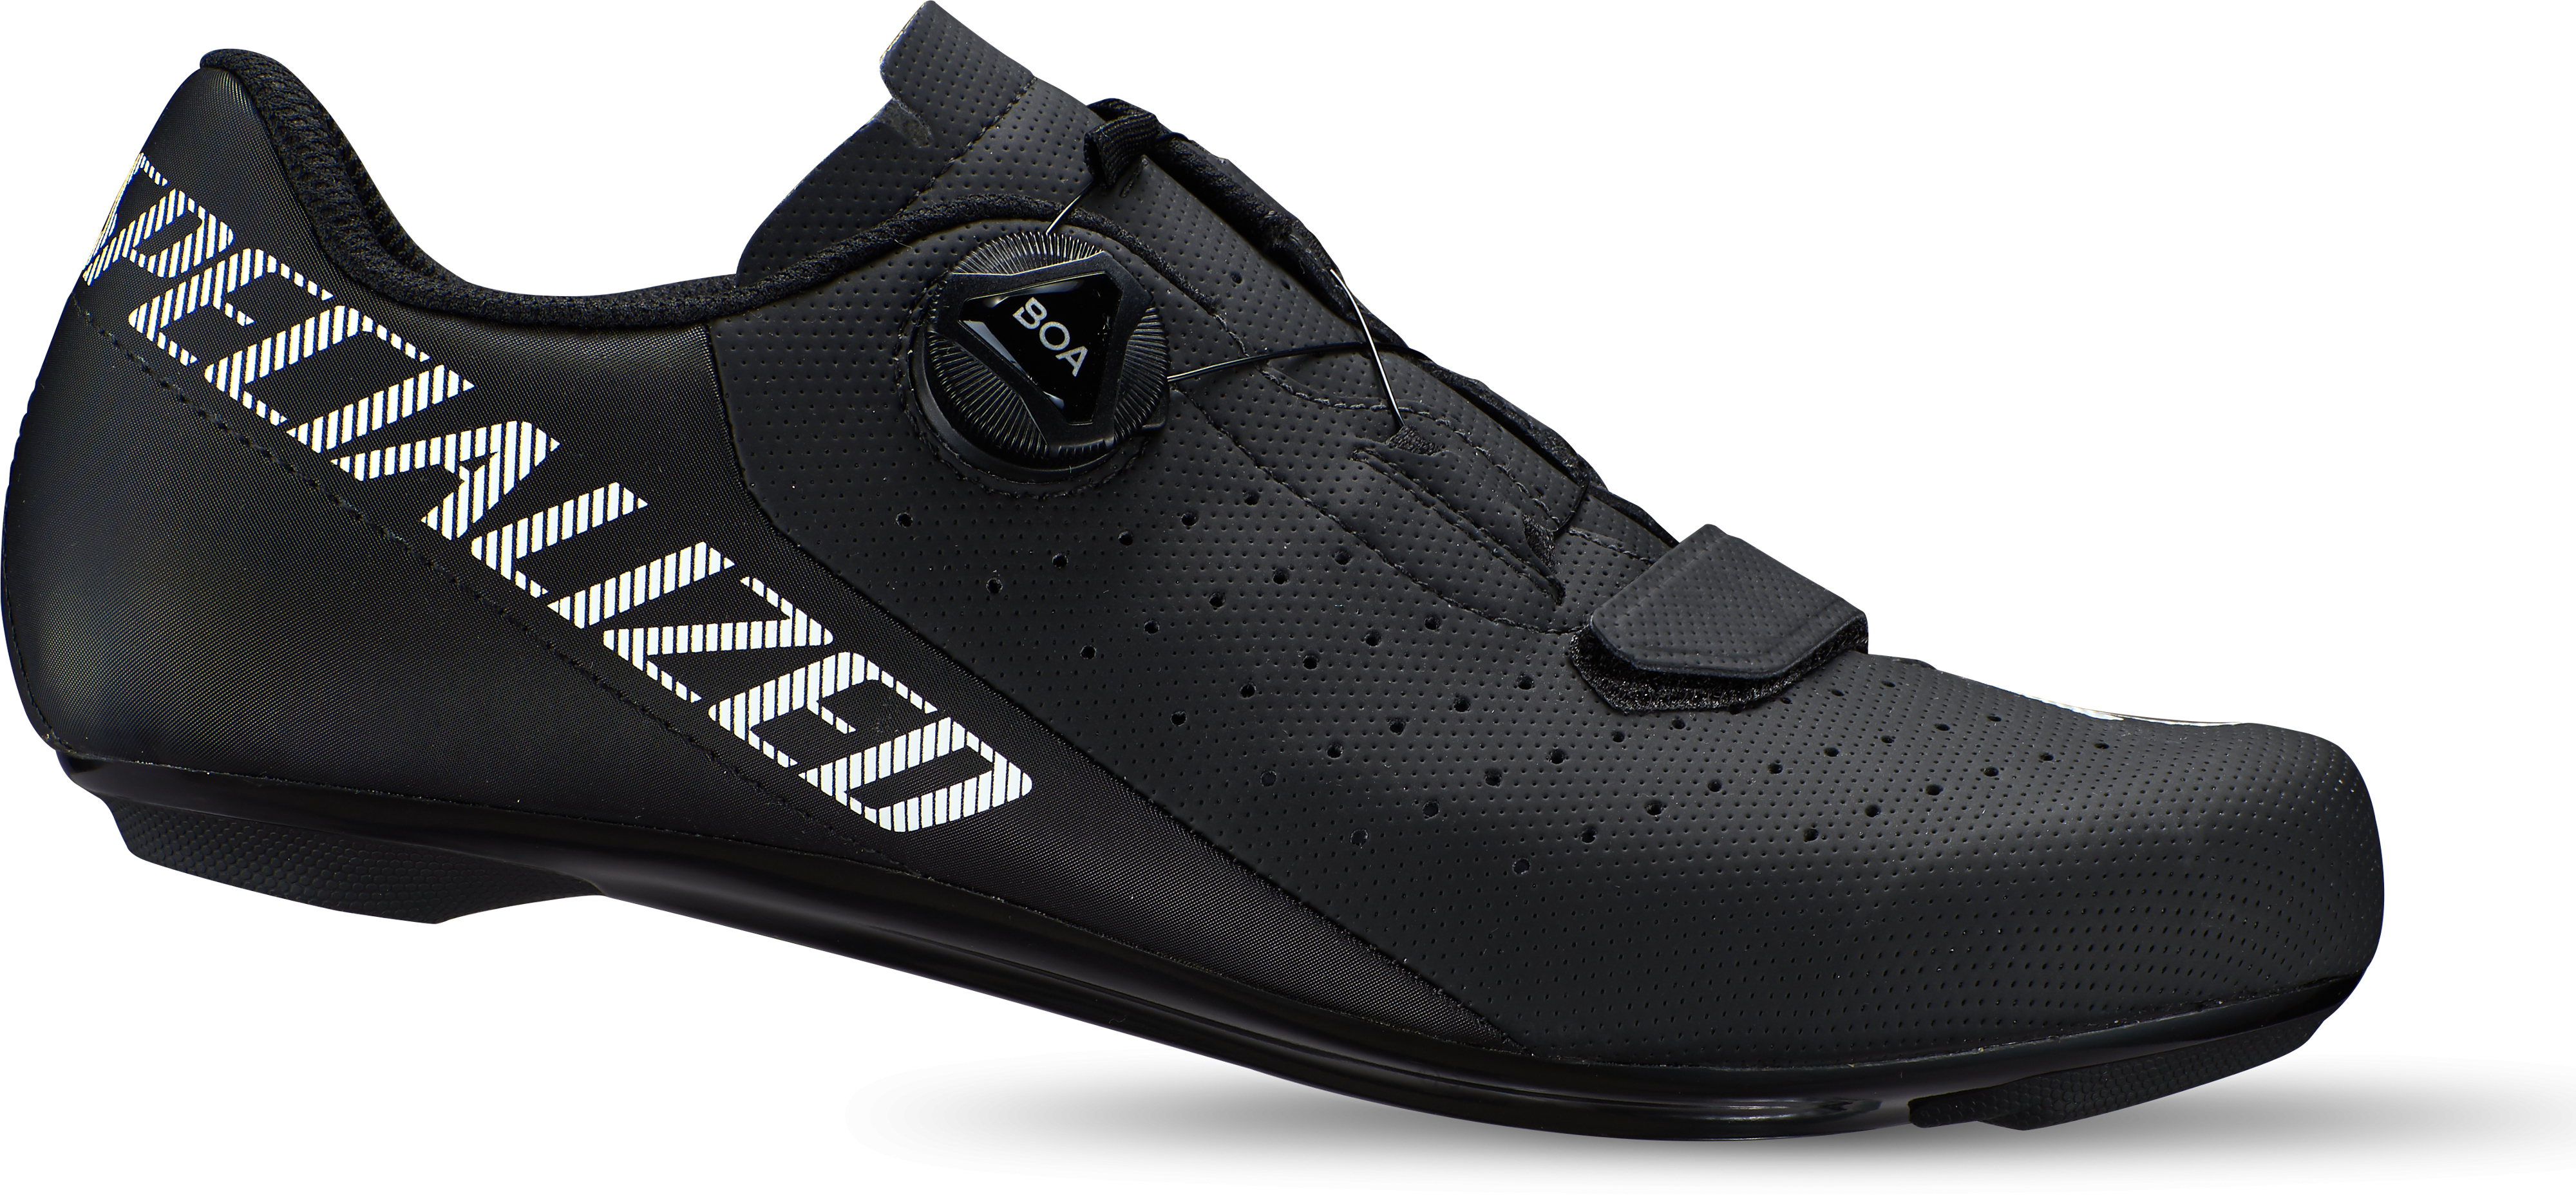 Specialized  Torch 1.0 Road Cycling Shoes  41 Black